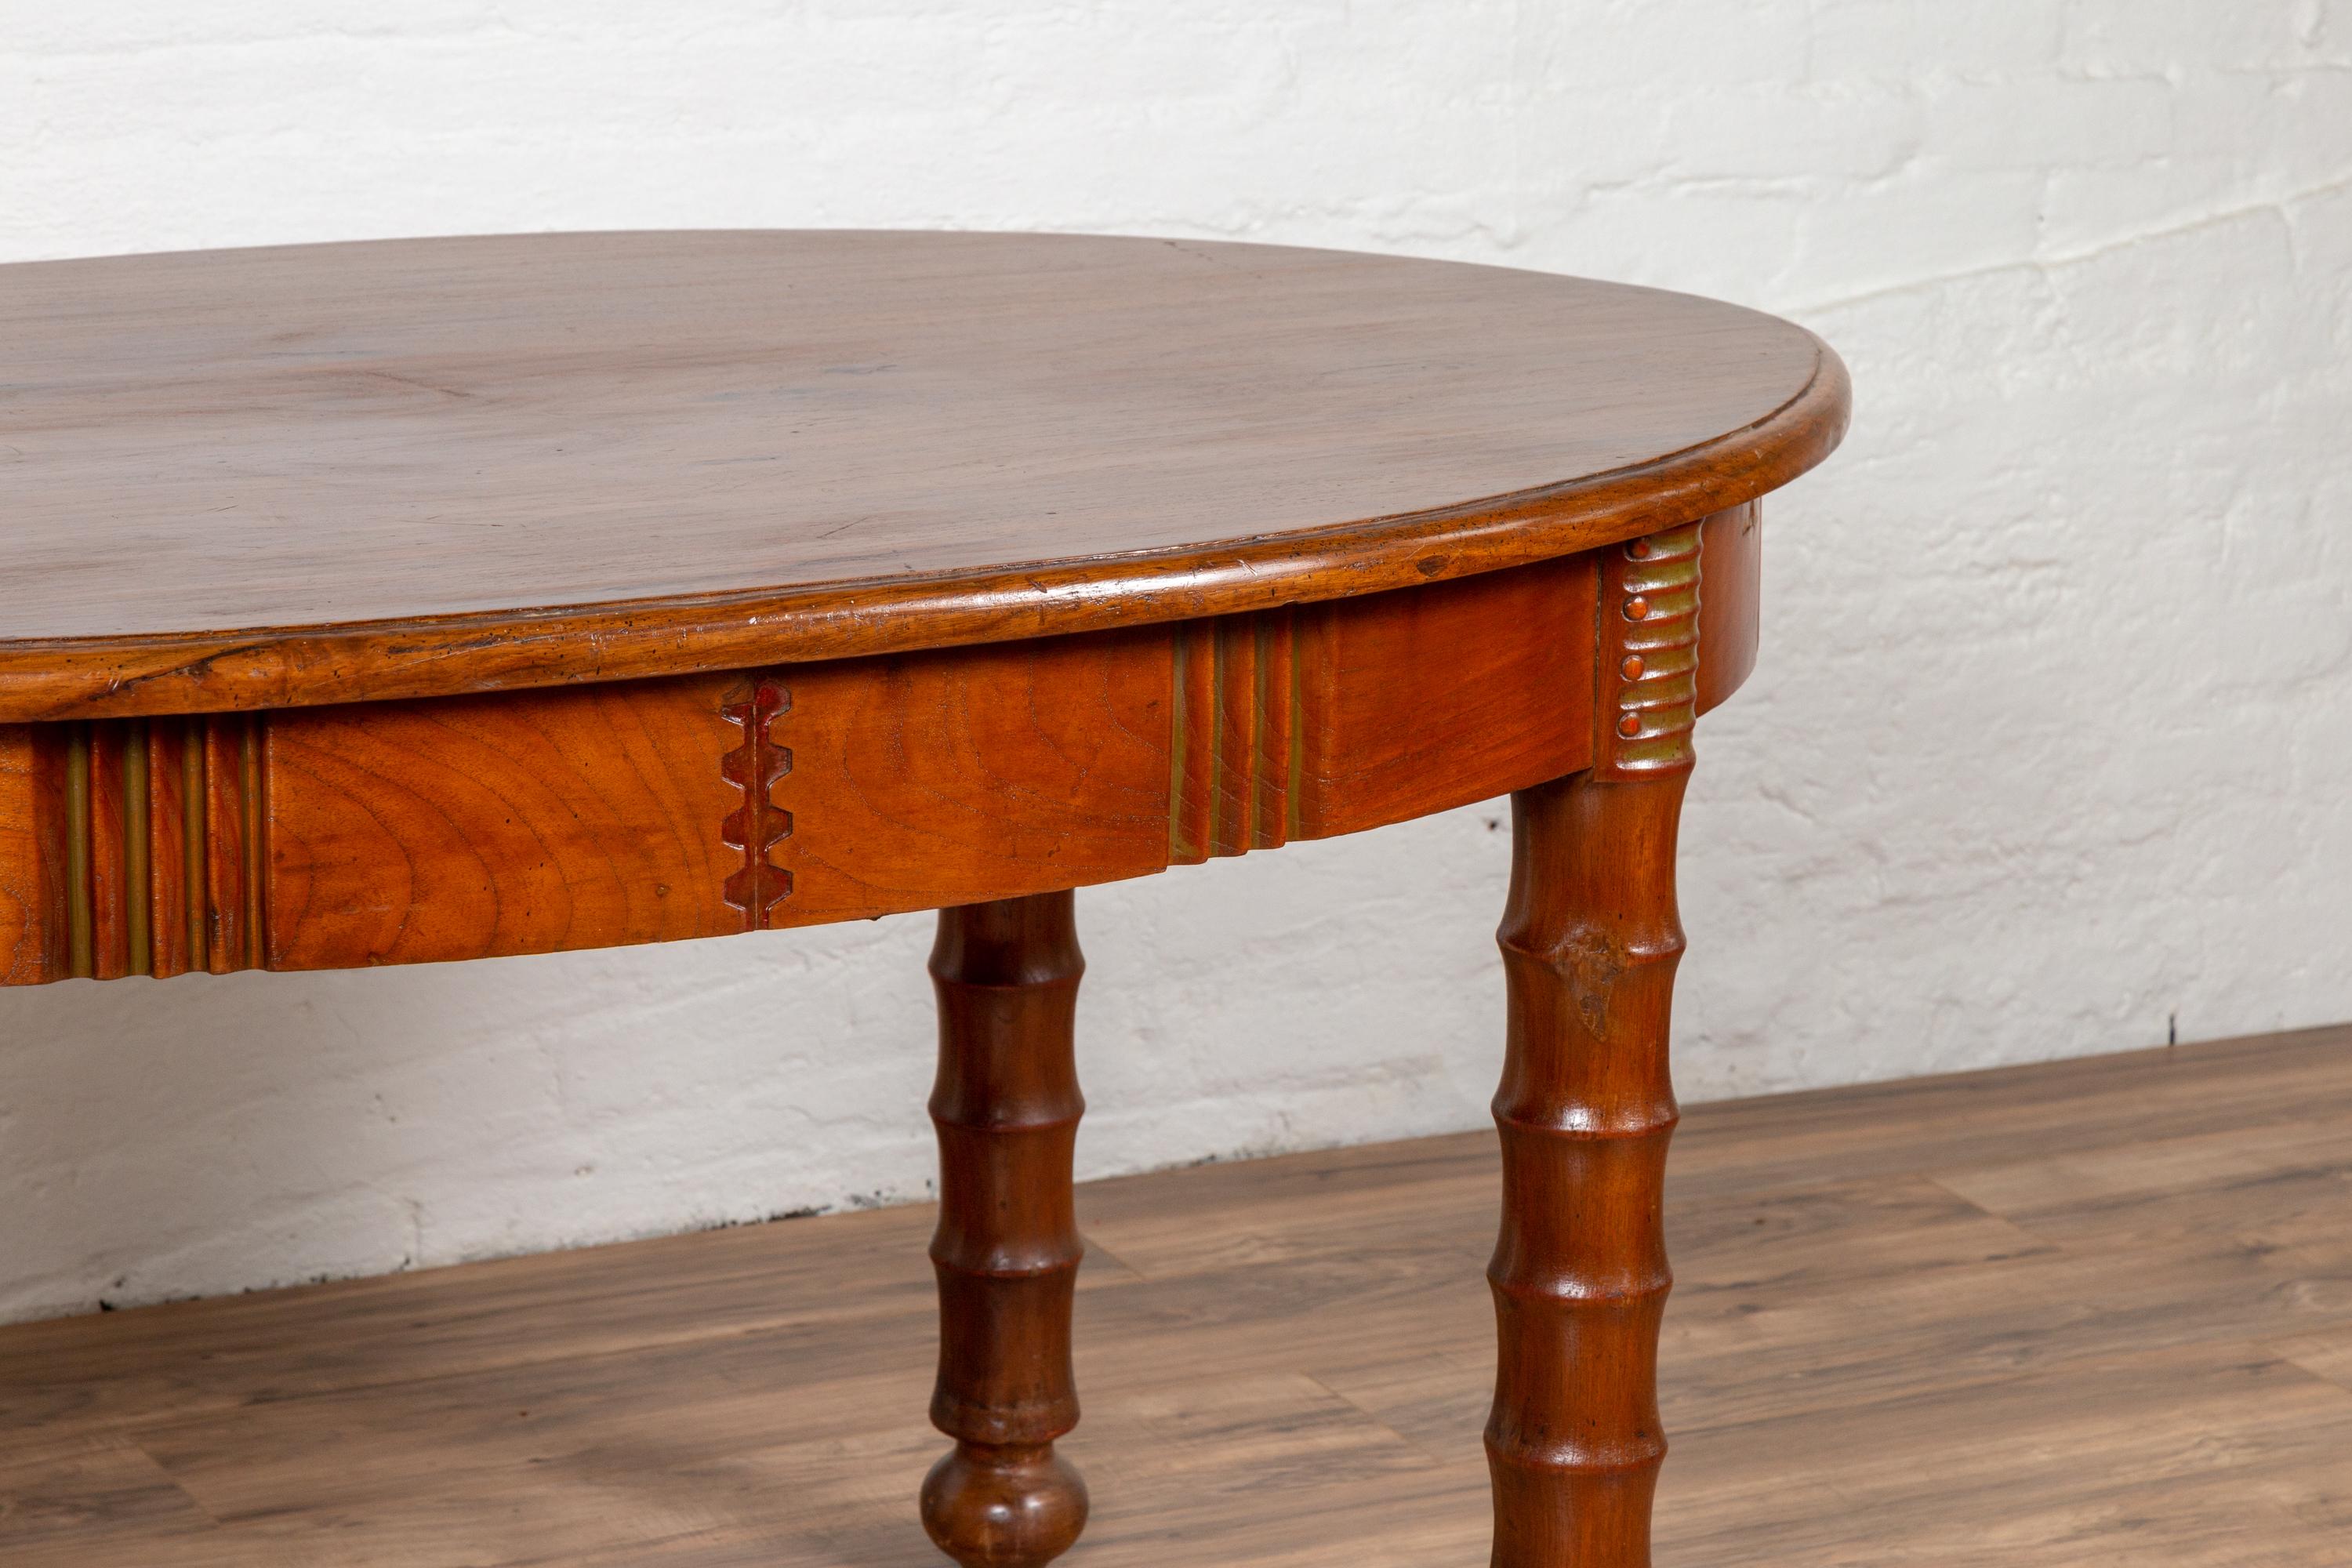 Indonesian Antique Oval Dining Room Table from Indonesia with Spindle Legs and Warm Patina For Sale